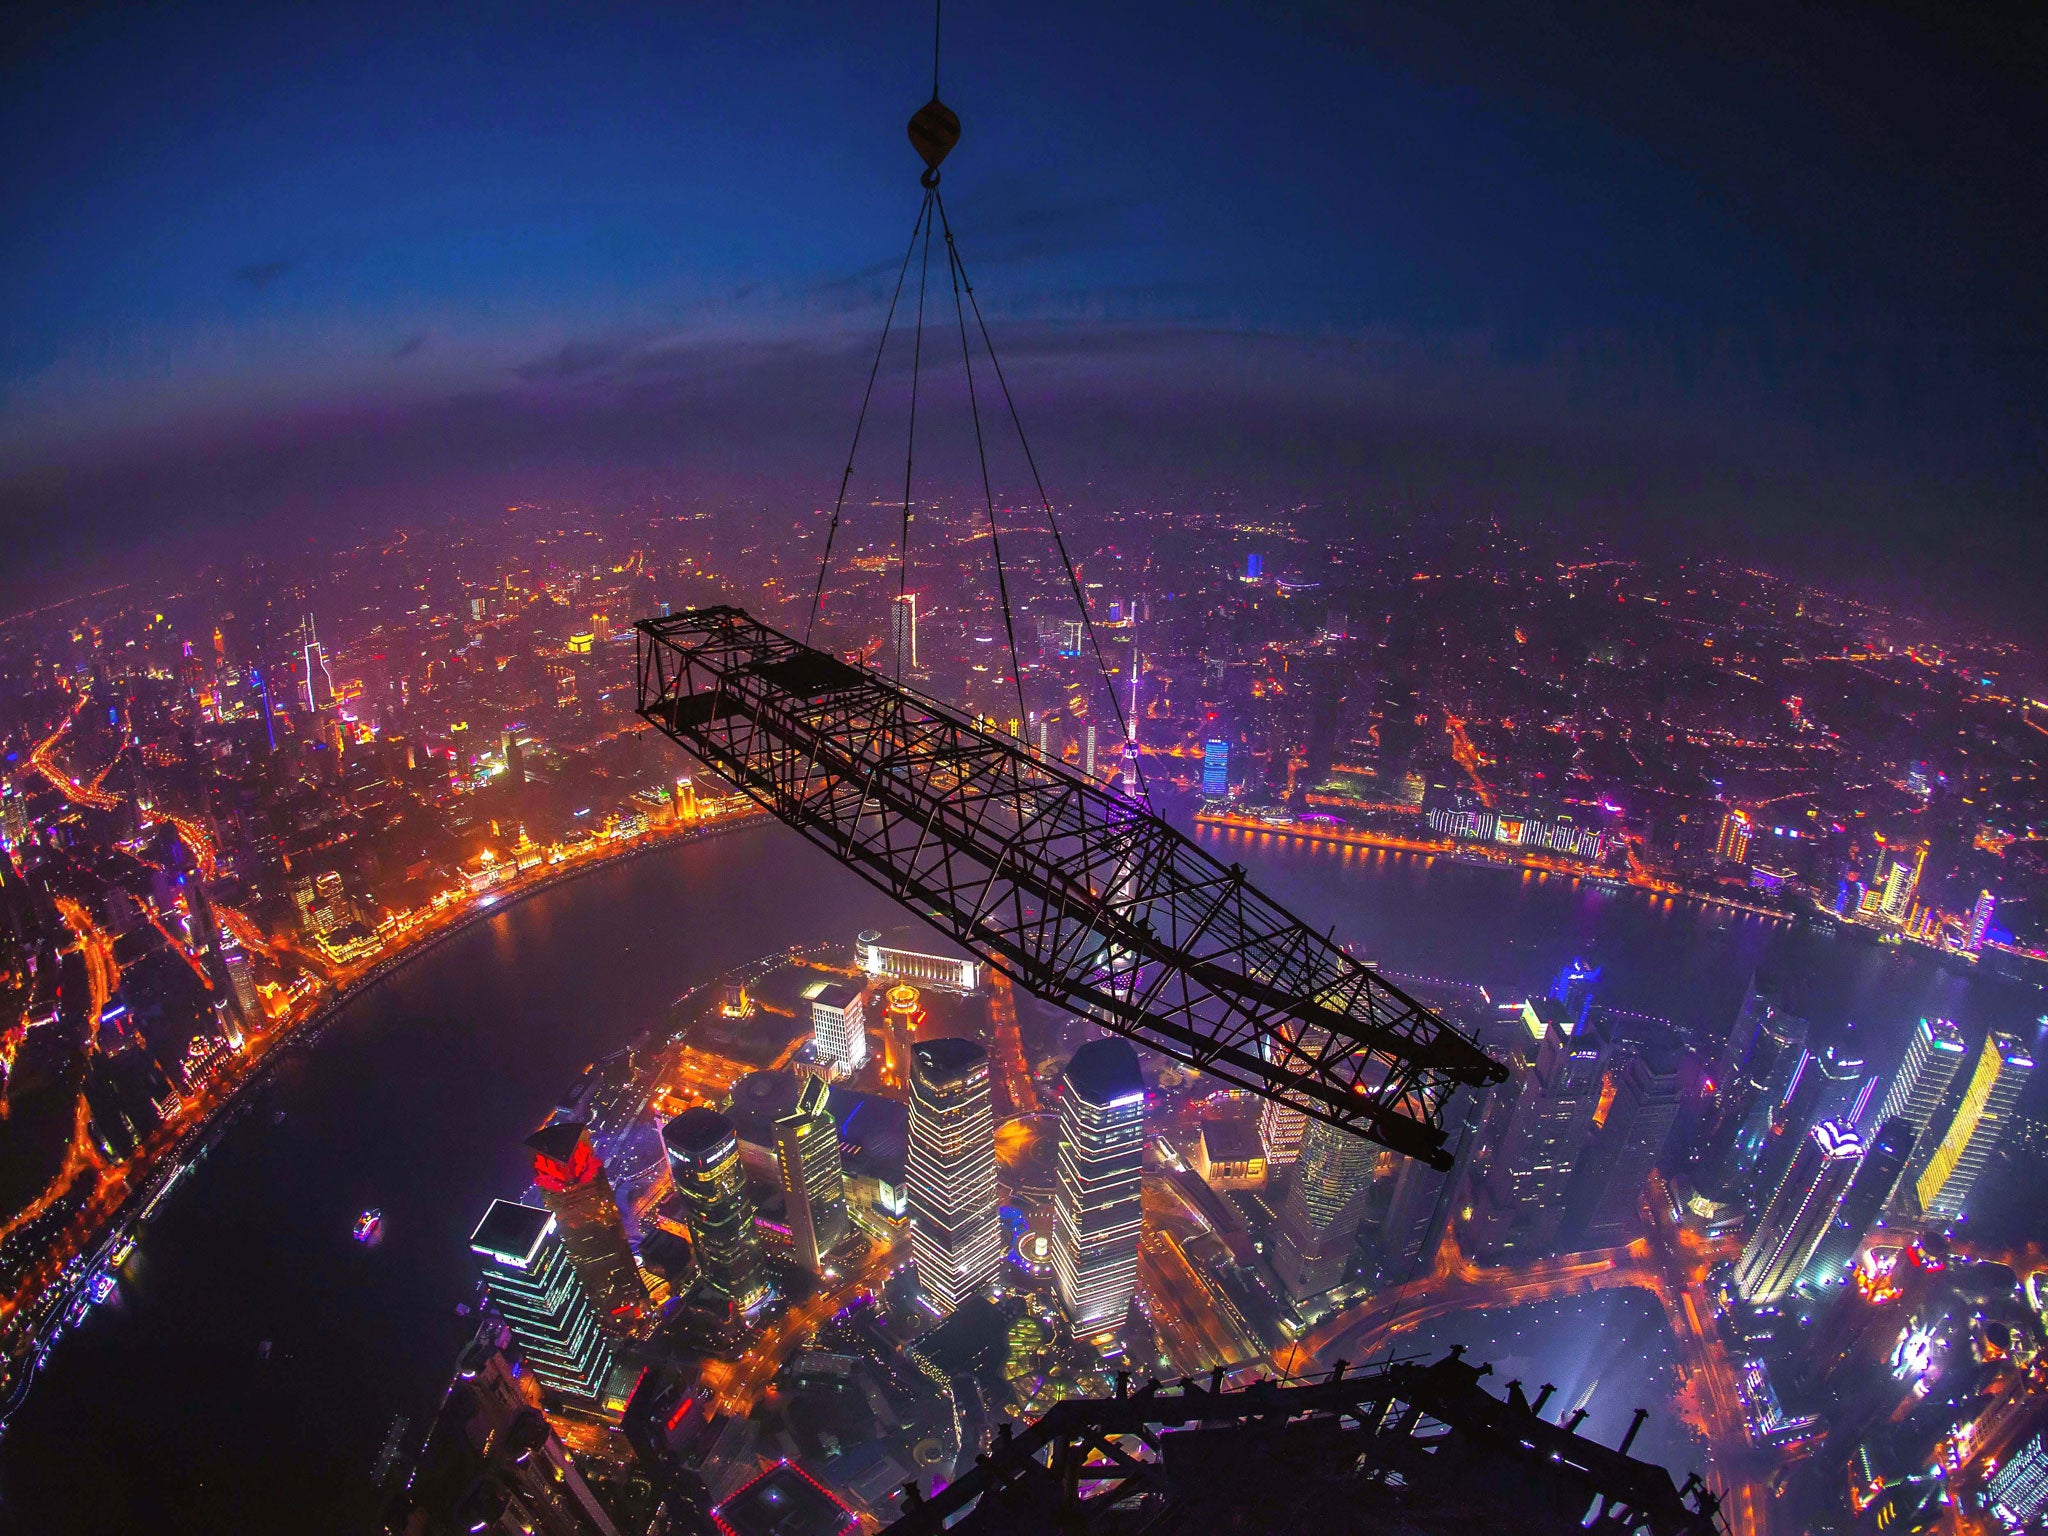 Cranes that have helped to build the Shanghai Tower, China's tallest building and the world's 2nd tallest, are seen being dismantled